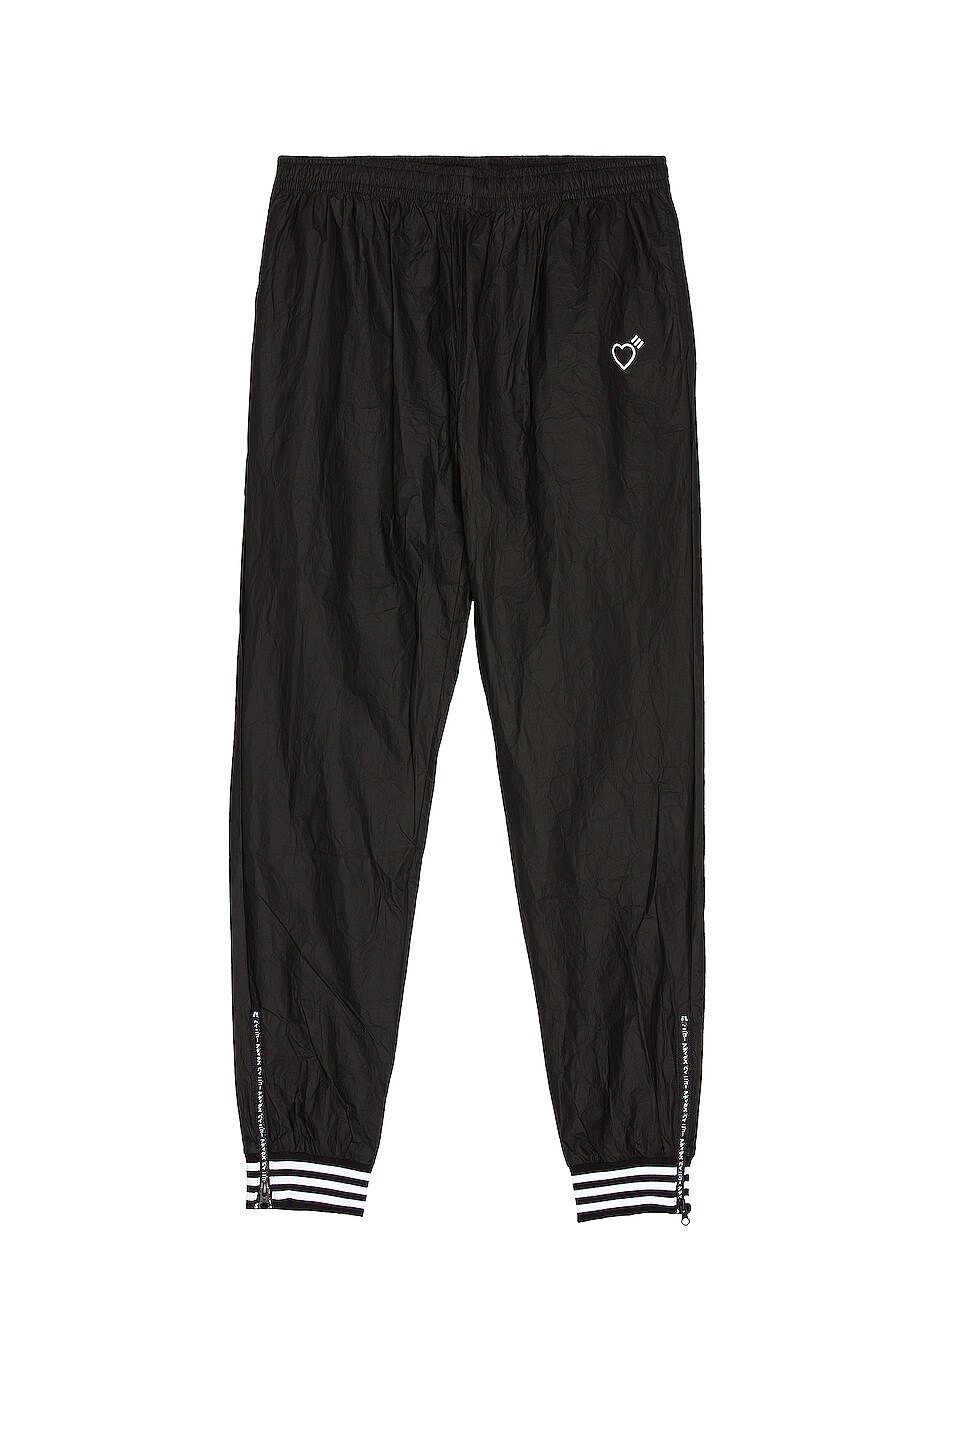 Image 1 of adidas x HUMAN MADE Tyvek Track Pants in Black